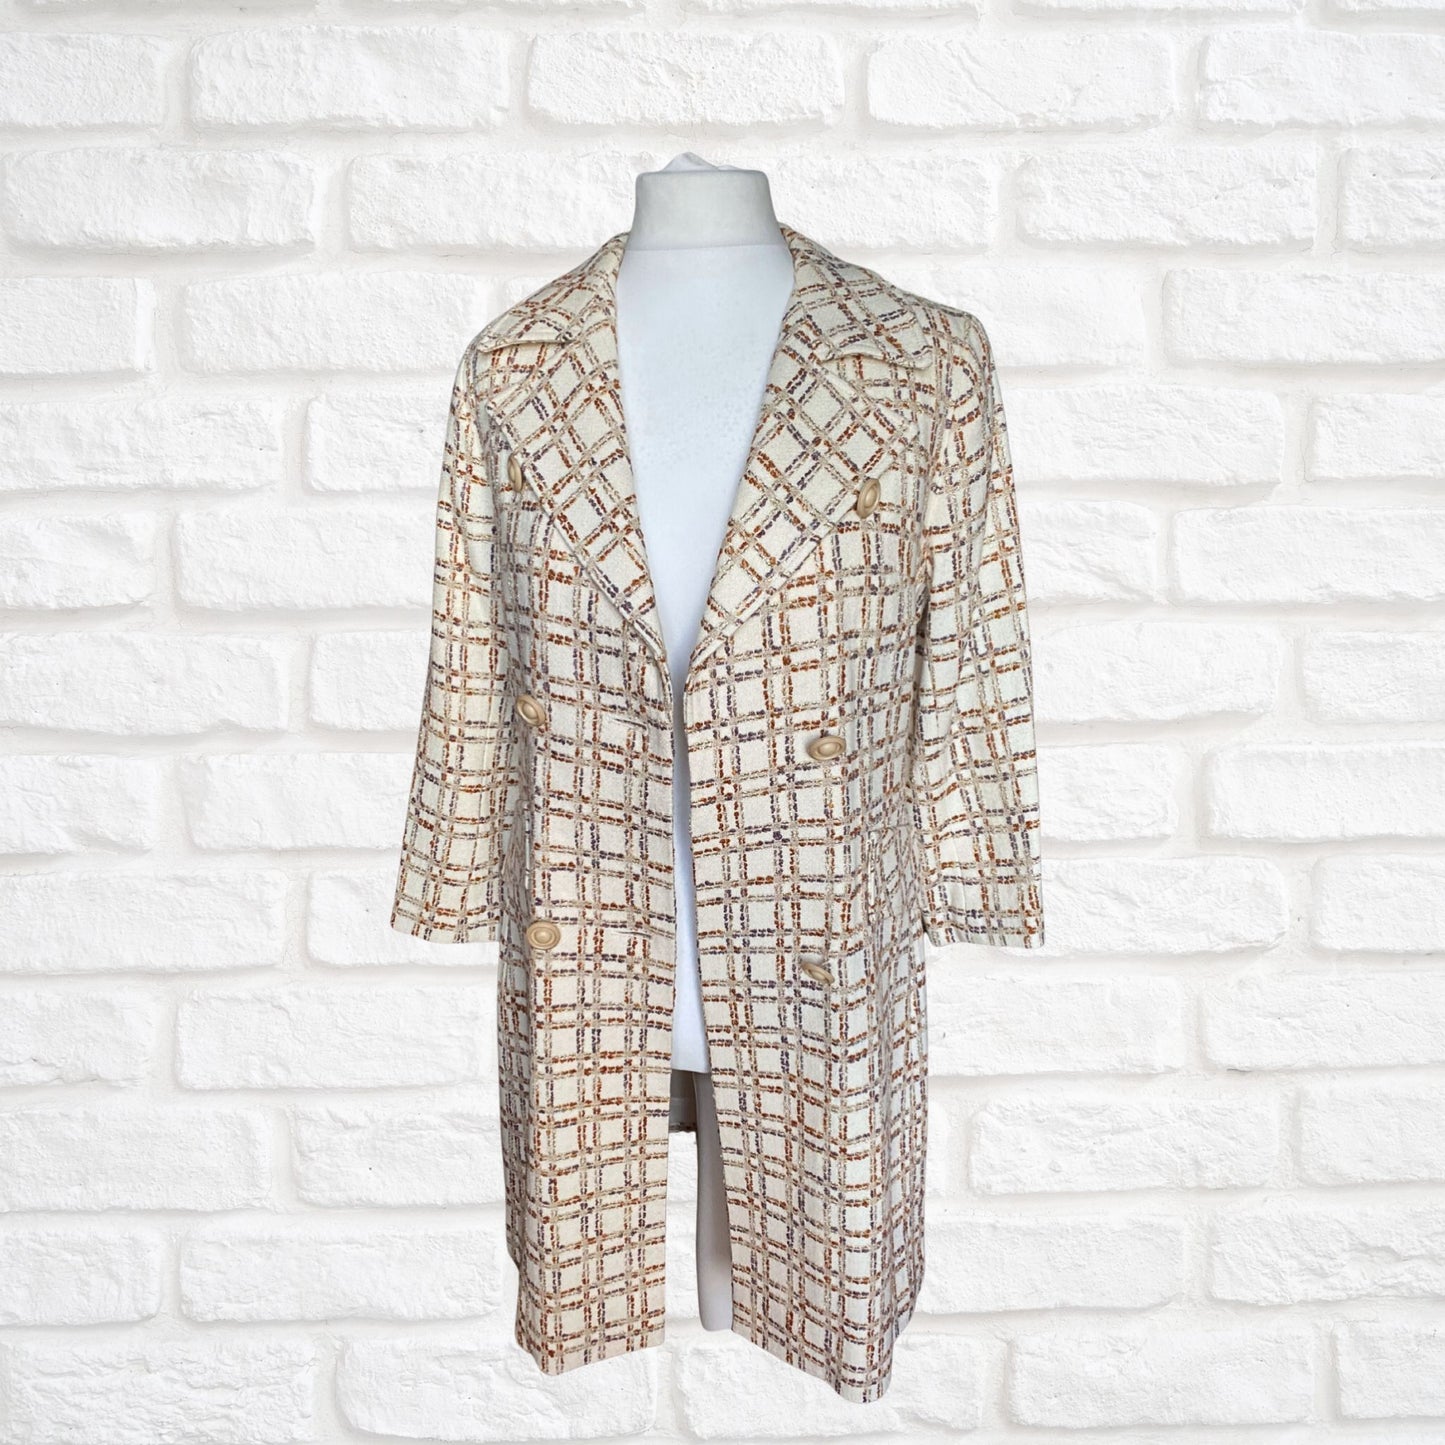 Vintage 60s/70s Cream and Copper Wool Blend Checked Vintage Coat Approx UK size 12-14